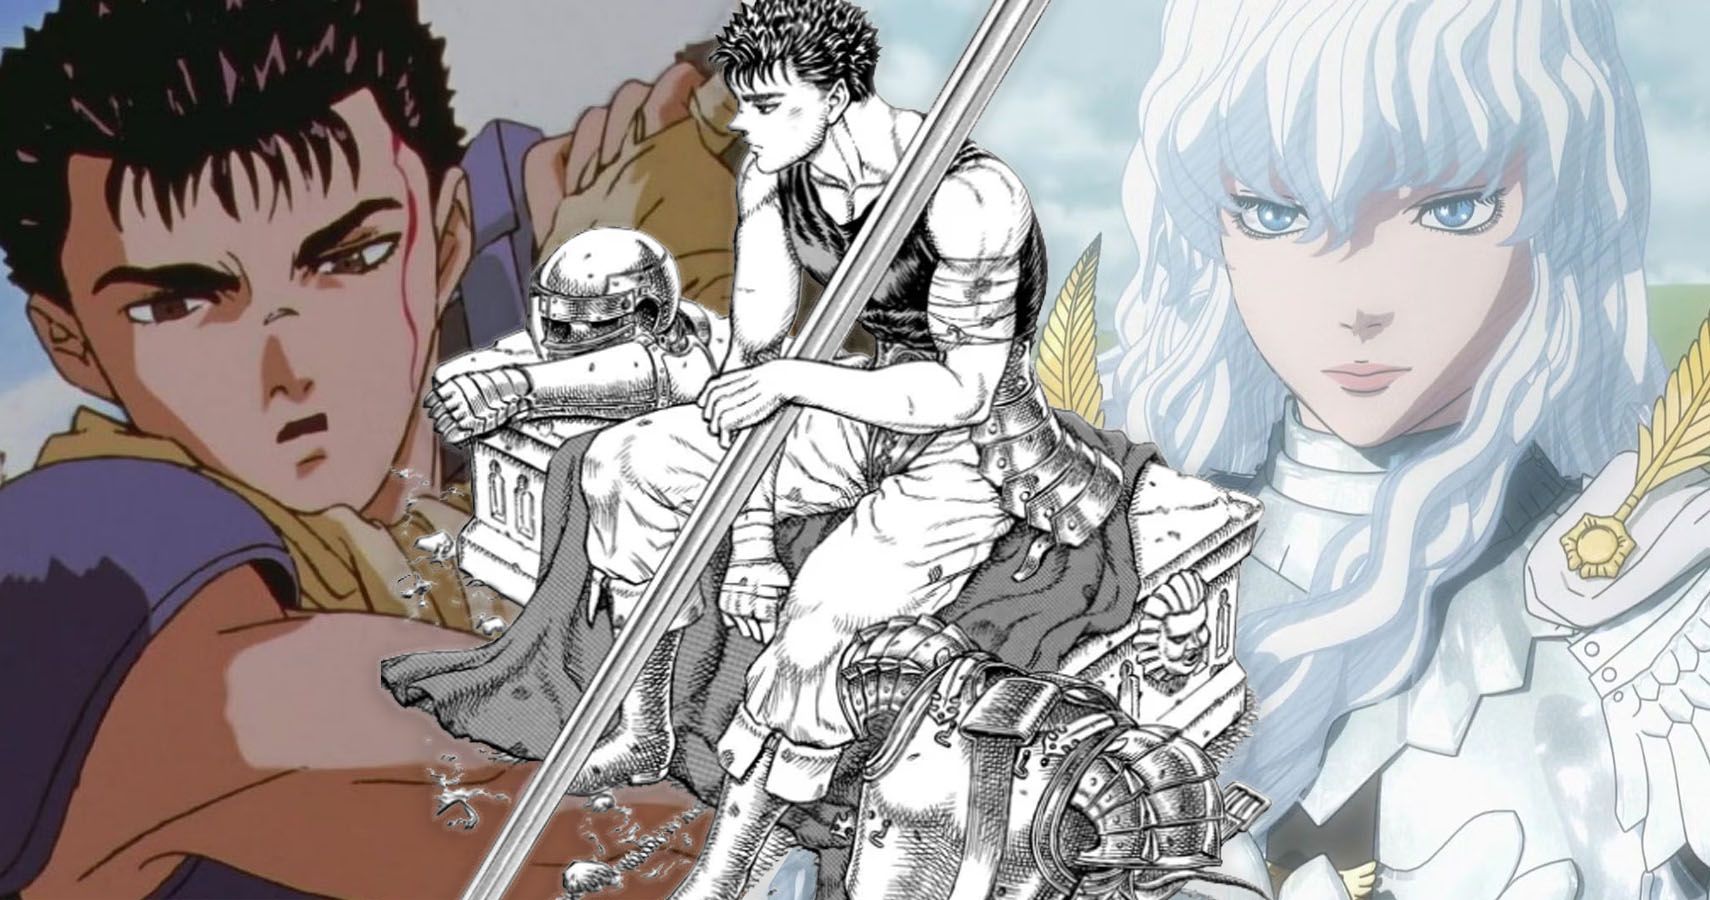 Guts from the 1997 anime and Griffith from the Golden Age movies with Manga Guts overlaid on top